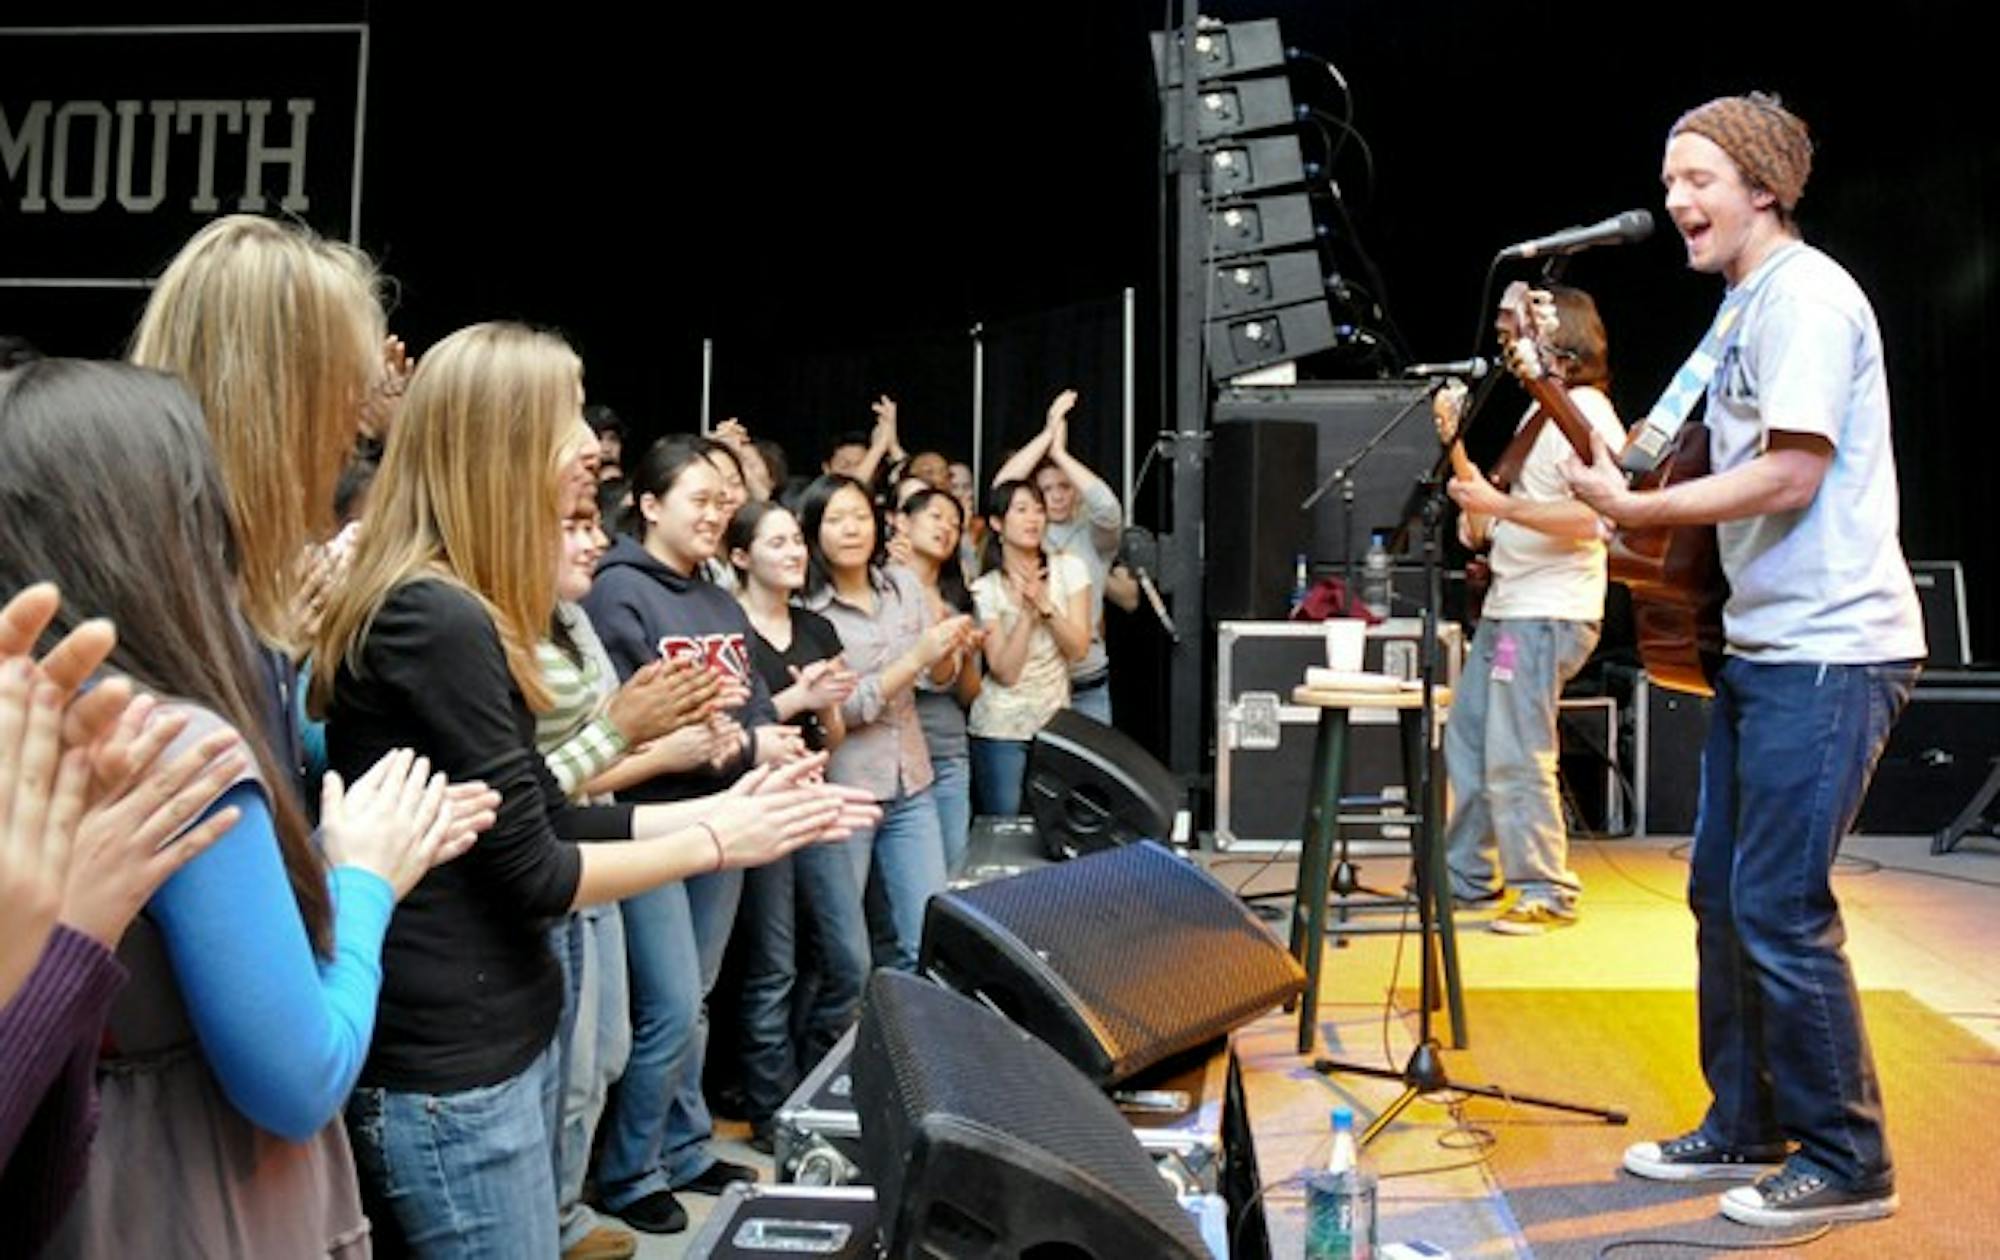 The sold-out crowd clap in unison to the melodies of Jason Mraz at Thursday night's concert in Alumni Hall.